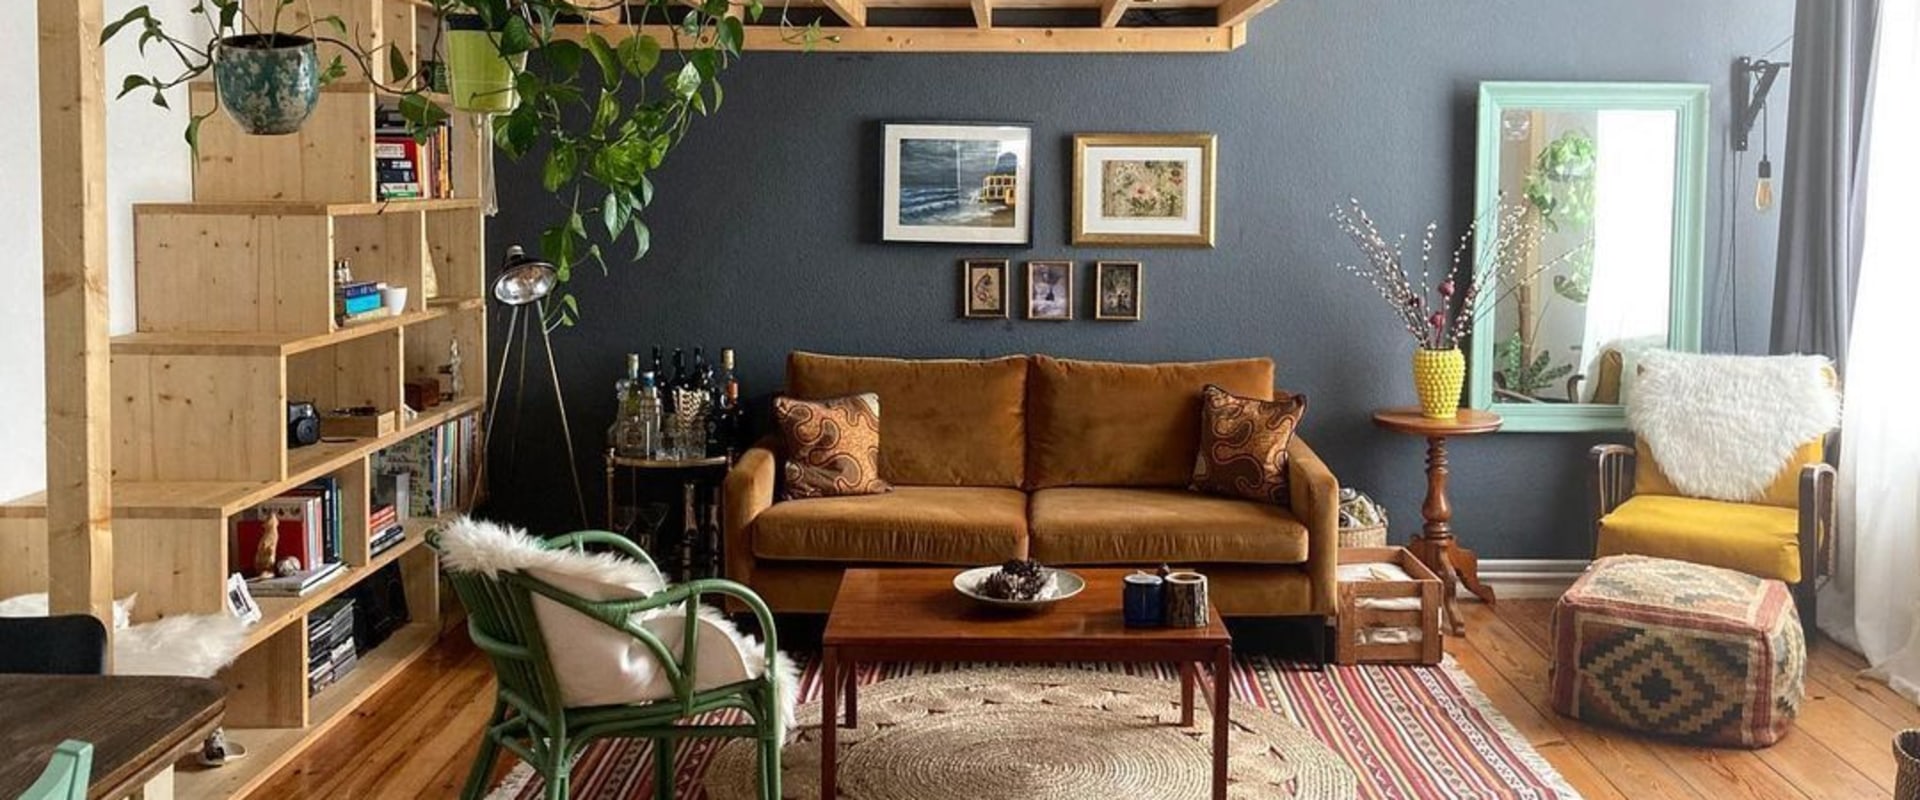 How can i make sure my home decor has an inviting atmosphere with a mix of old and new elements?